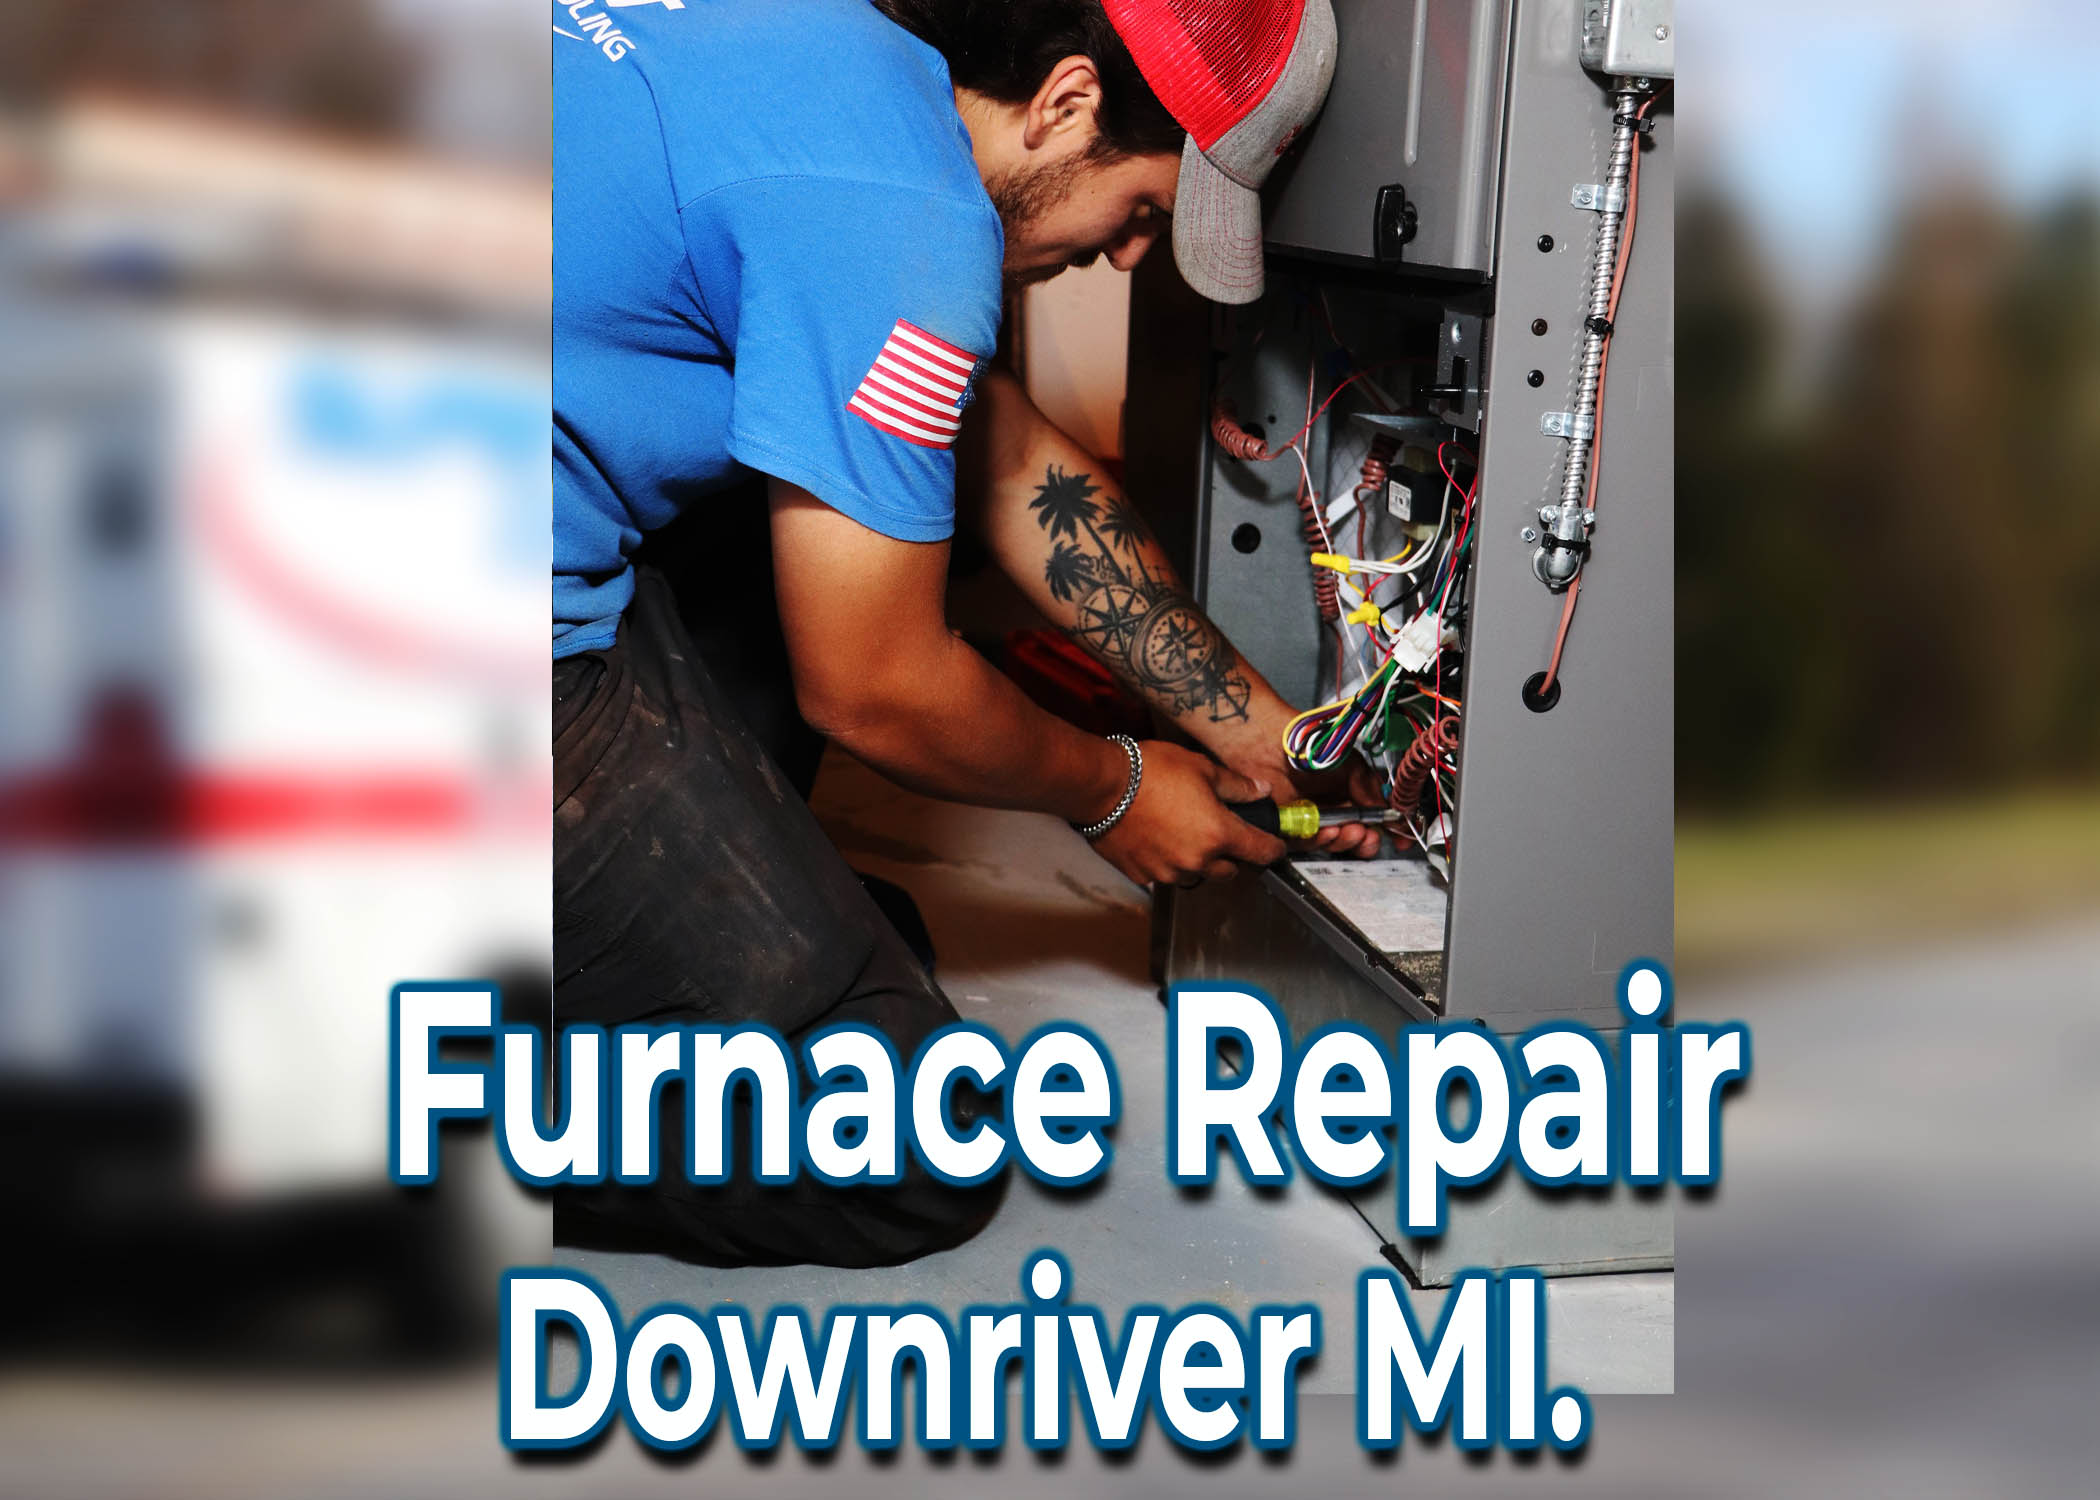 Furnace Repair Downriver MI. How to Know If the Furnace Control Board is Bad